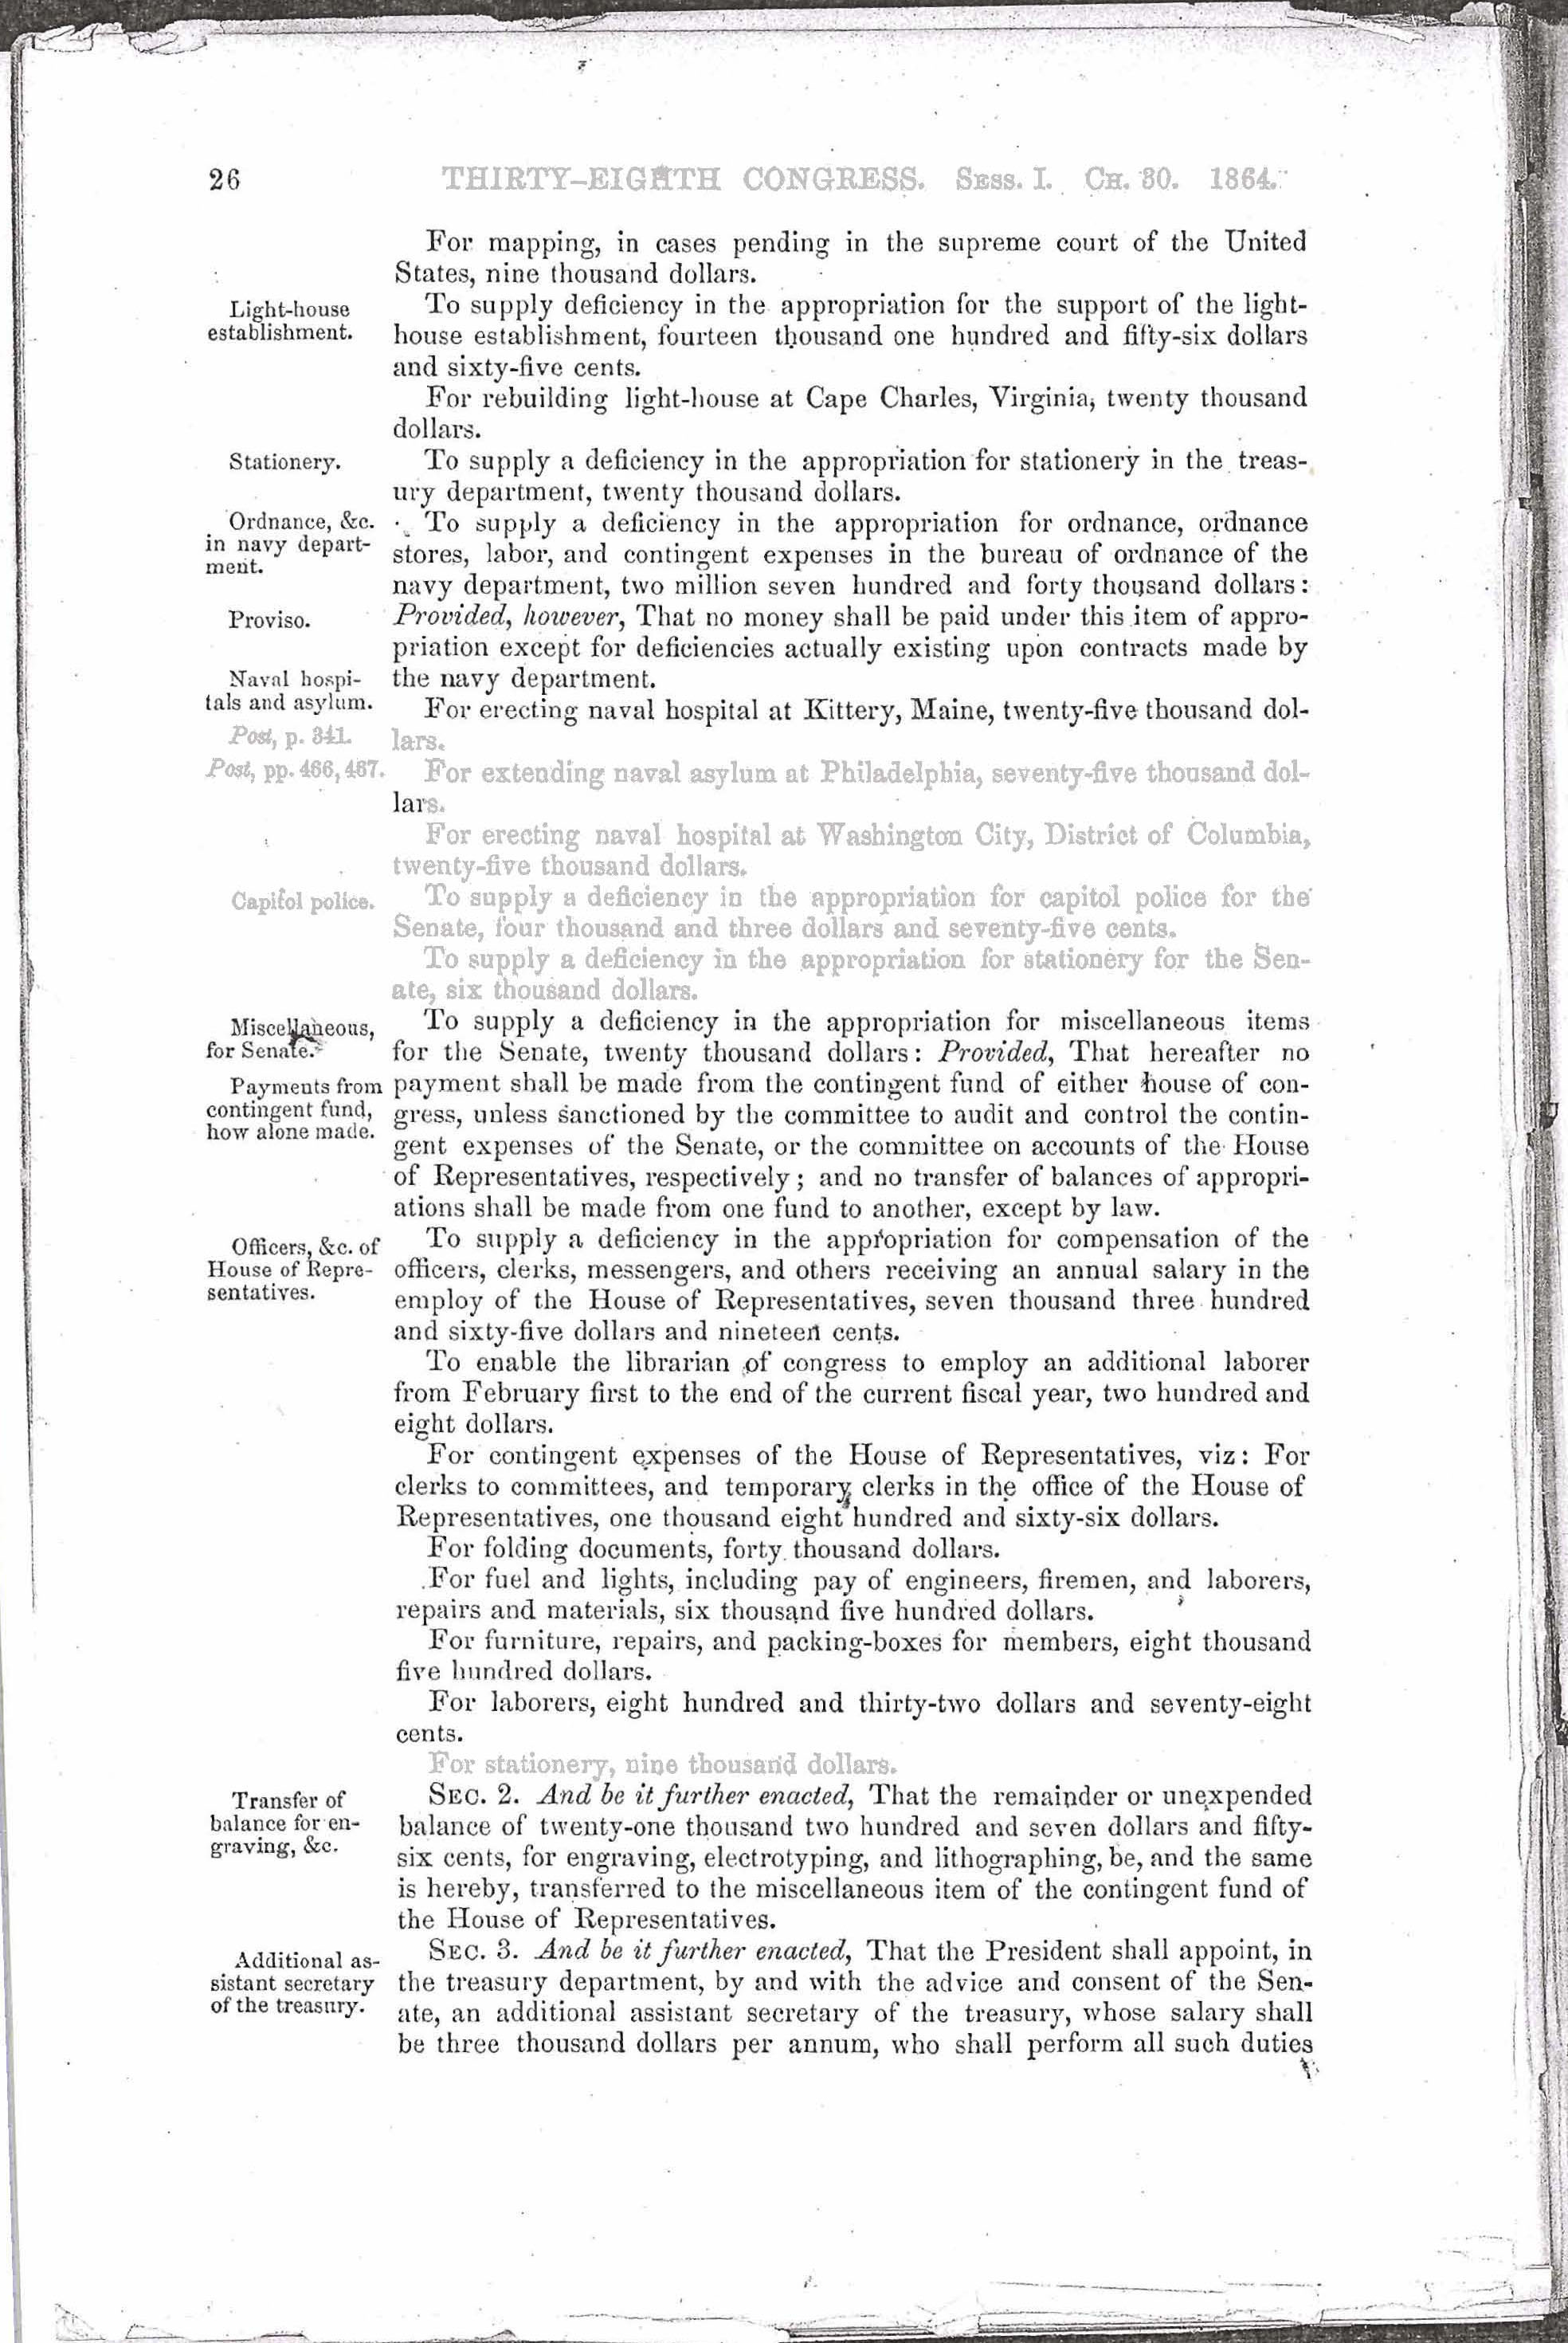 Act of Congress Authorizing Construction of the Washington Naval Hospital, Page 5 of 7